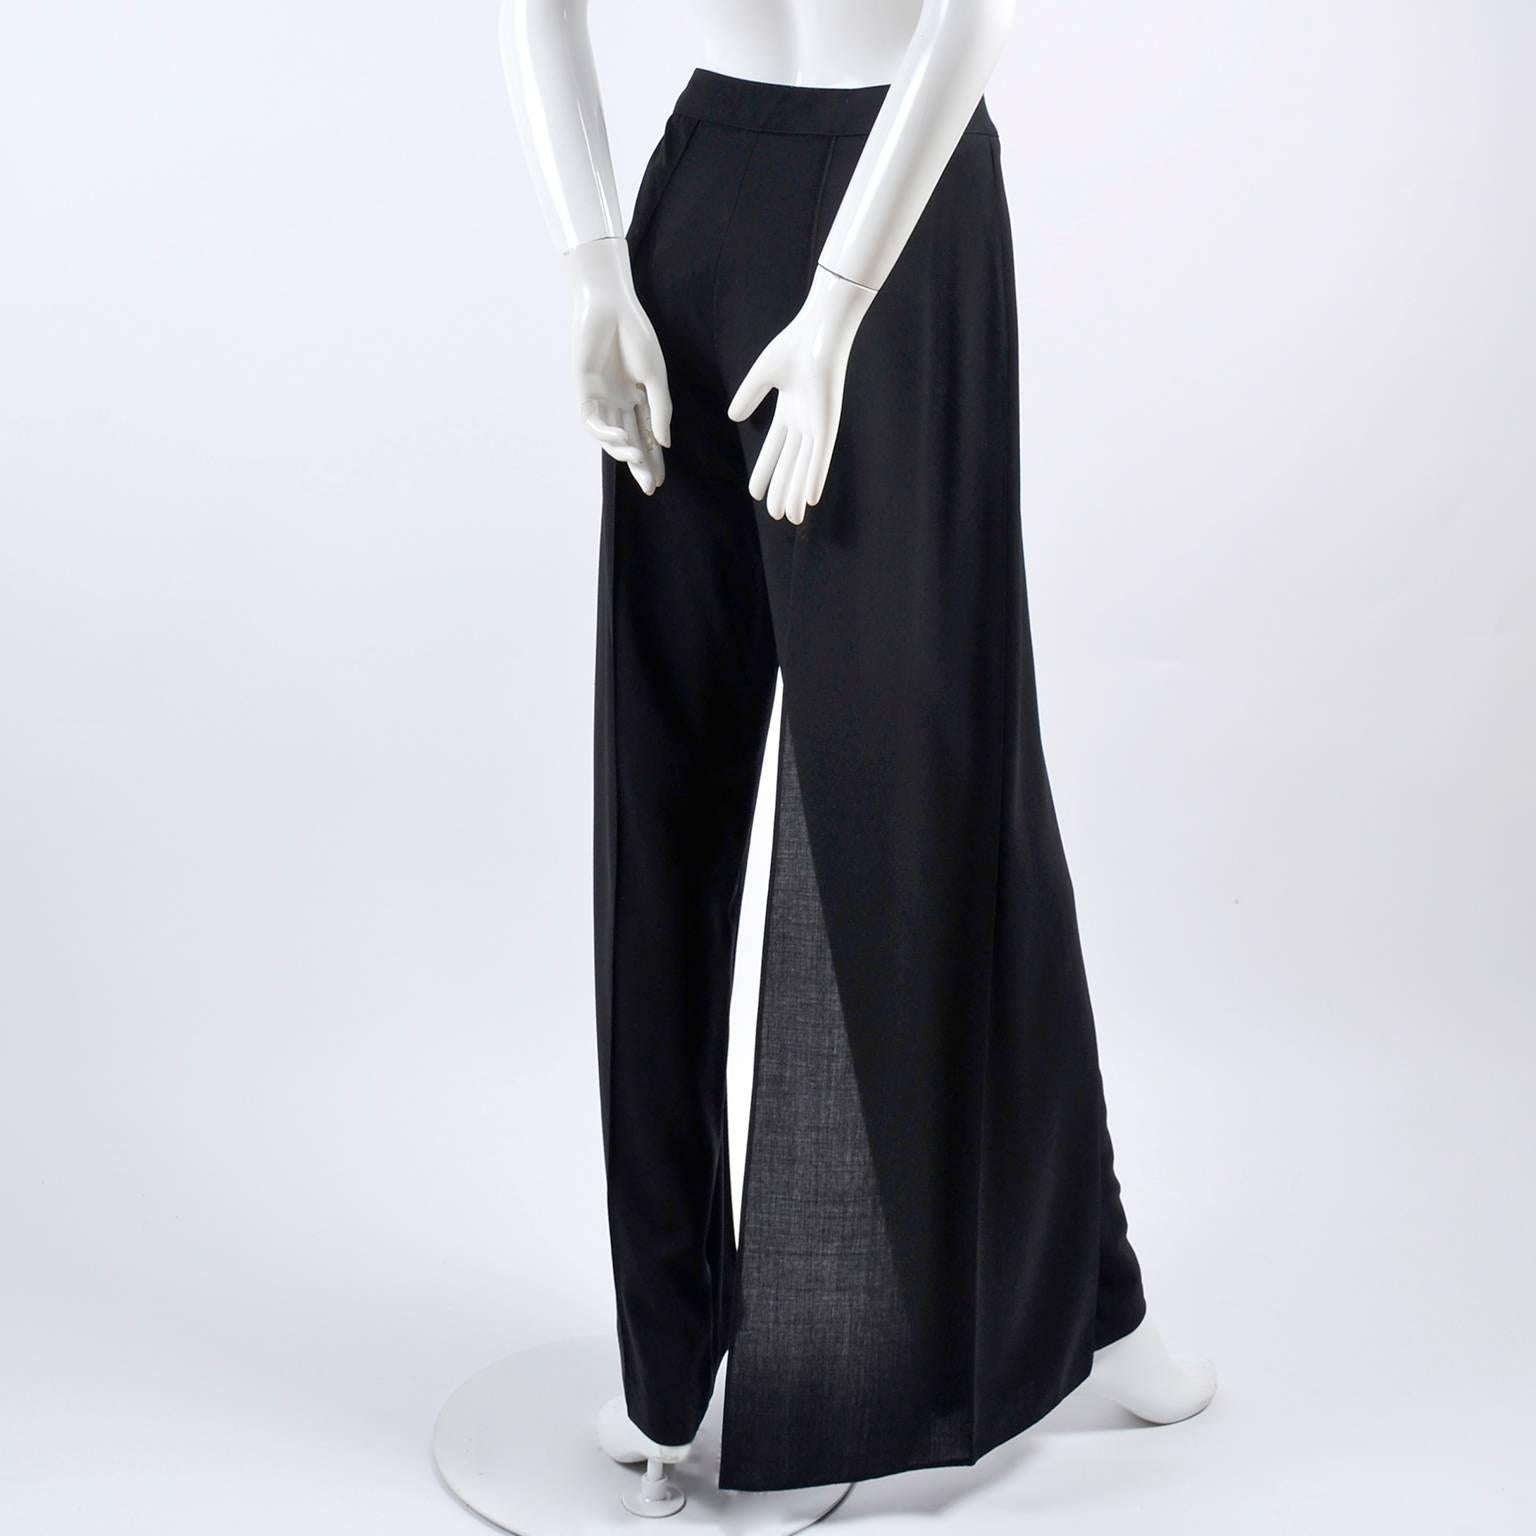 These black Chanel Pants are new with their original tags attached. The high waist pants are from spring 1999 and are made of black 100% ultra fine wool. The fly away panel on one of the sides give the appearance of palazzo style pants, as well as